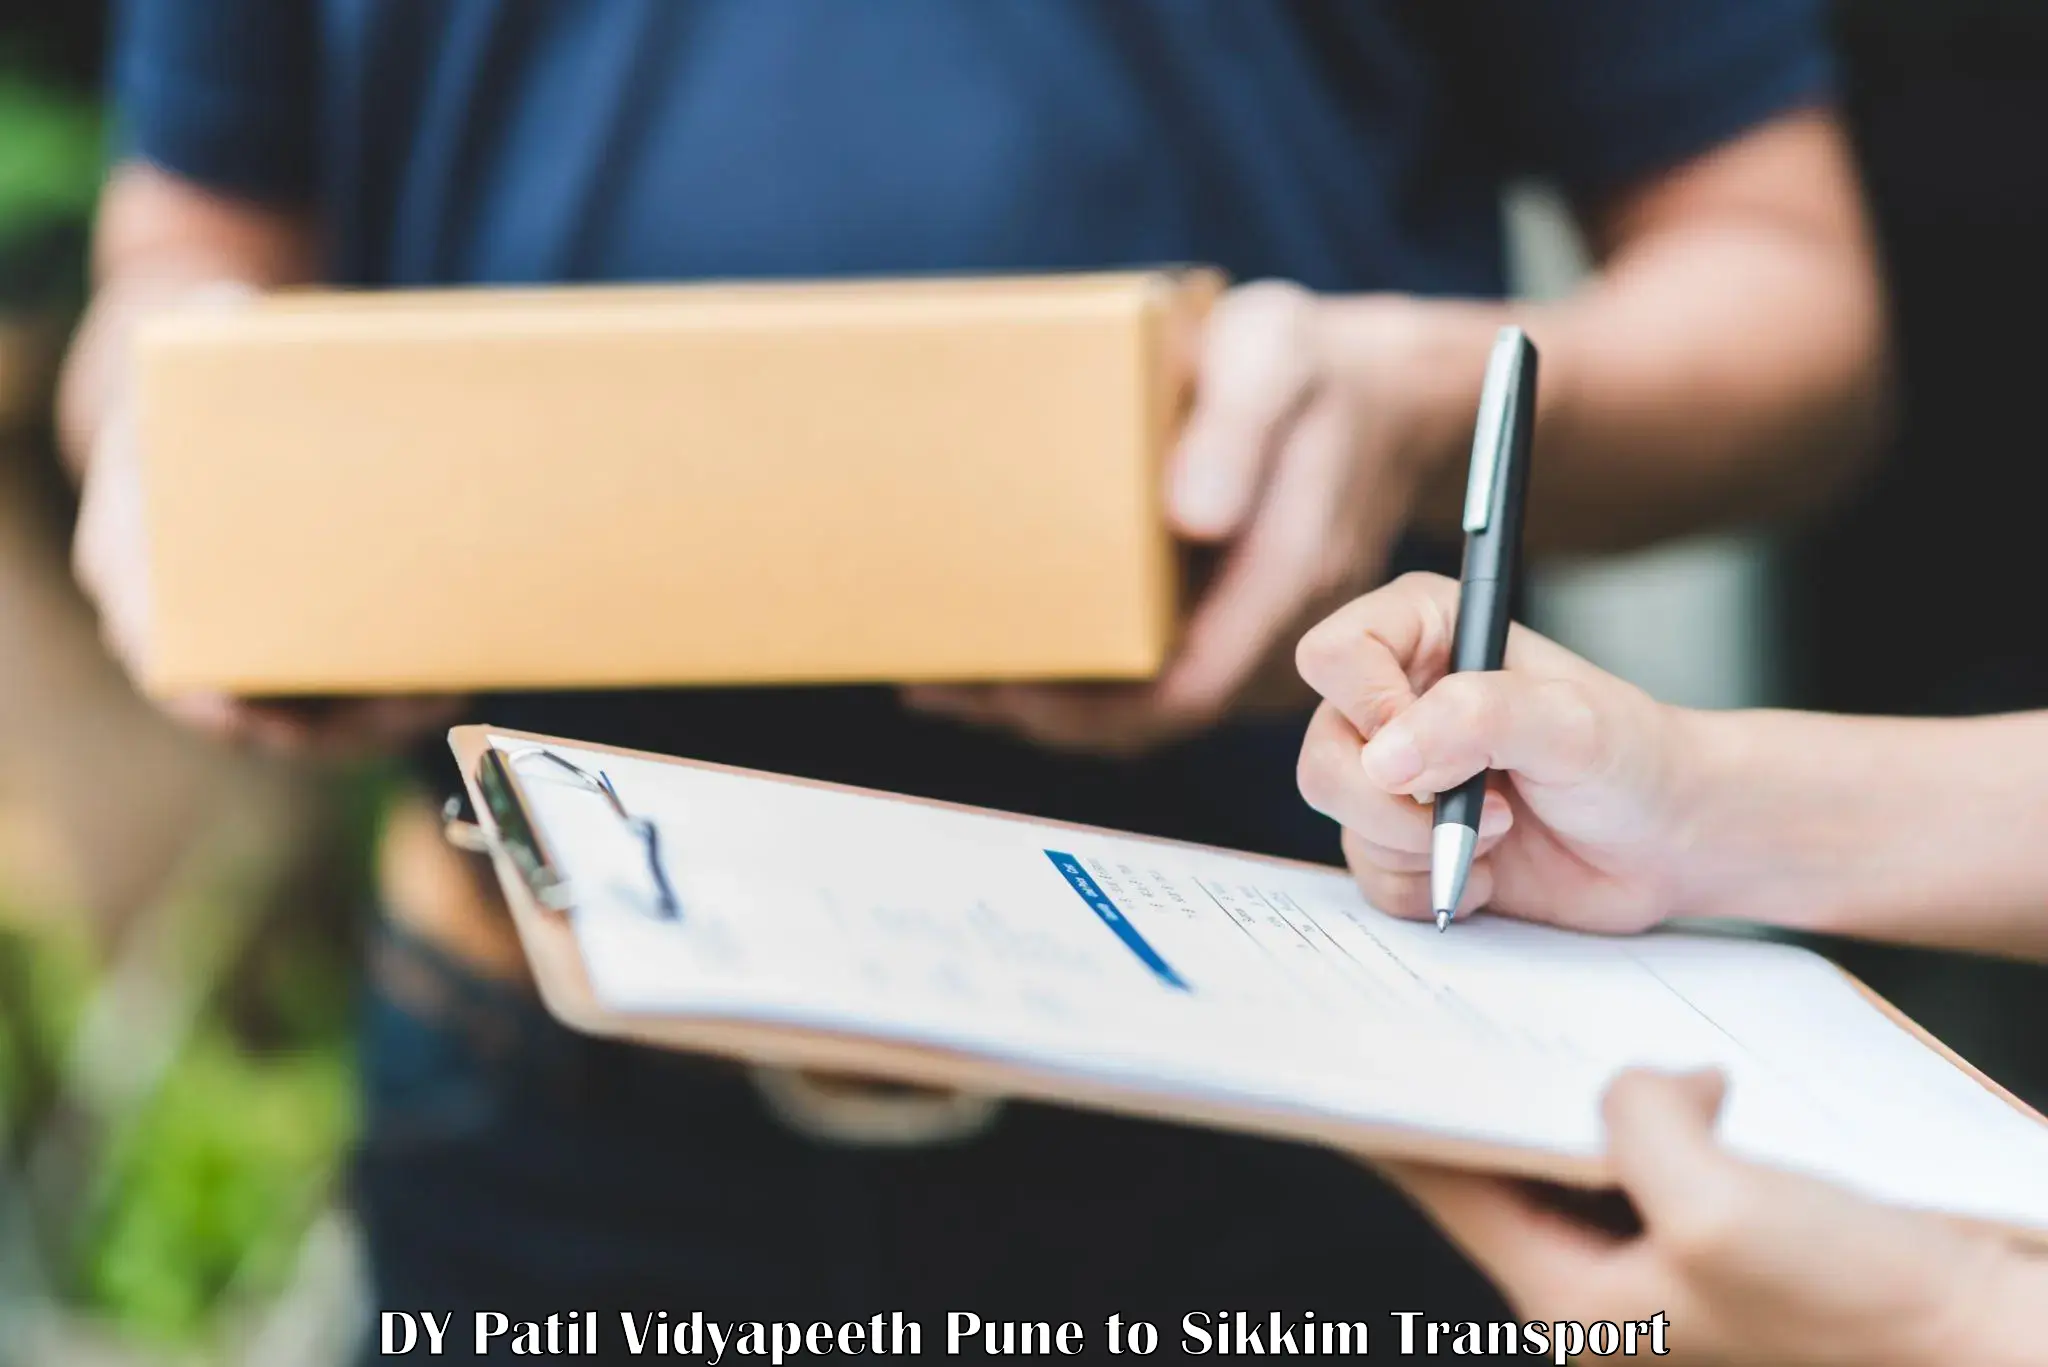 Nationwide transport services DY Patil Vidyapeeth Pune to Ranipool